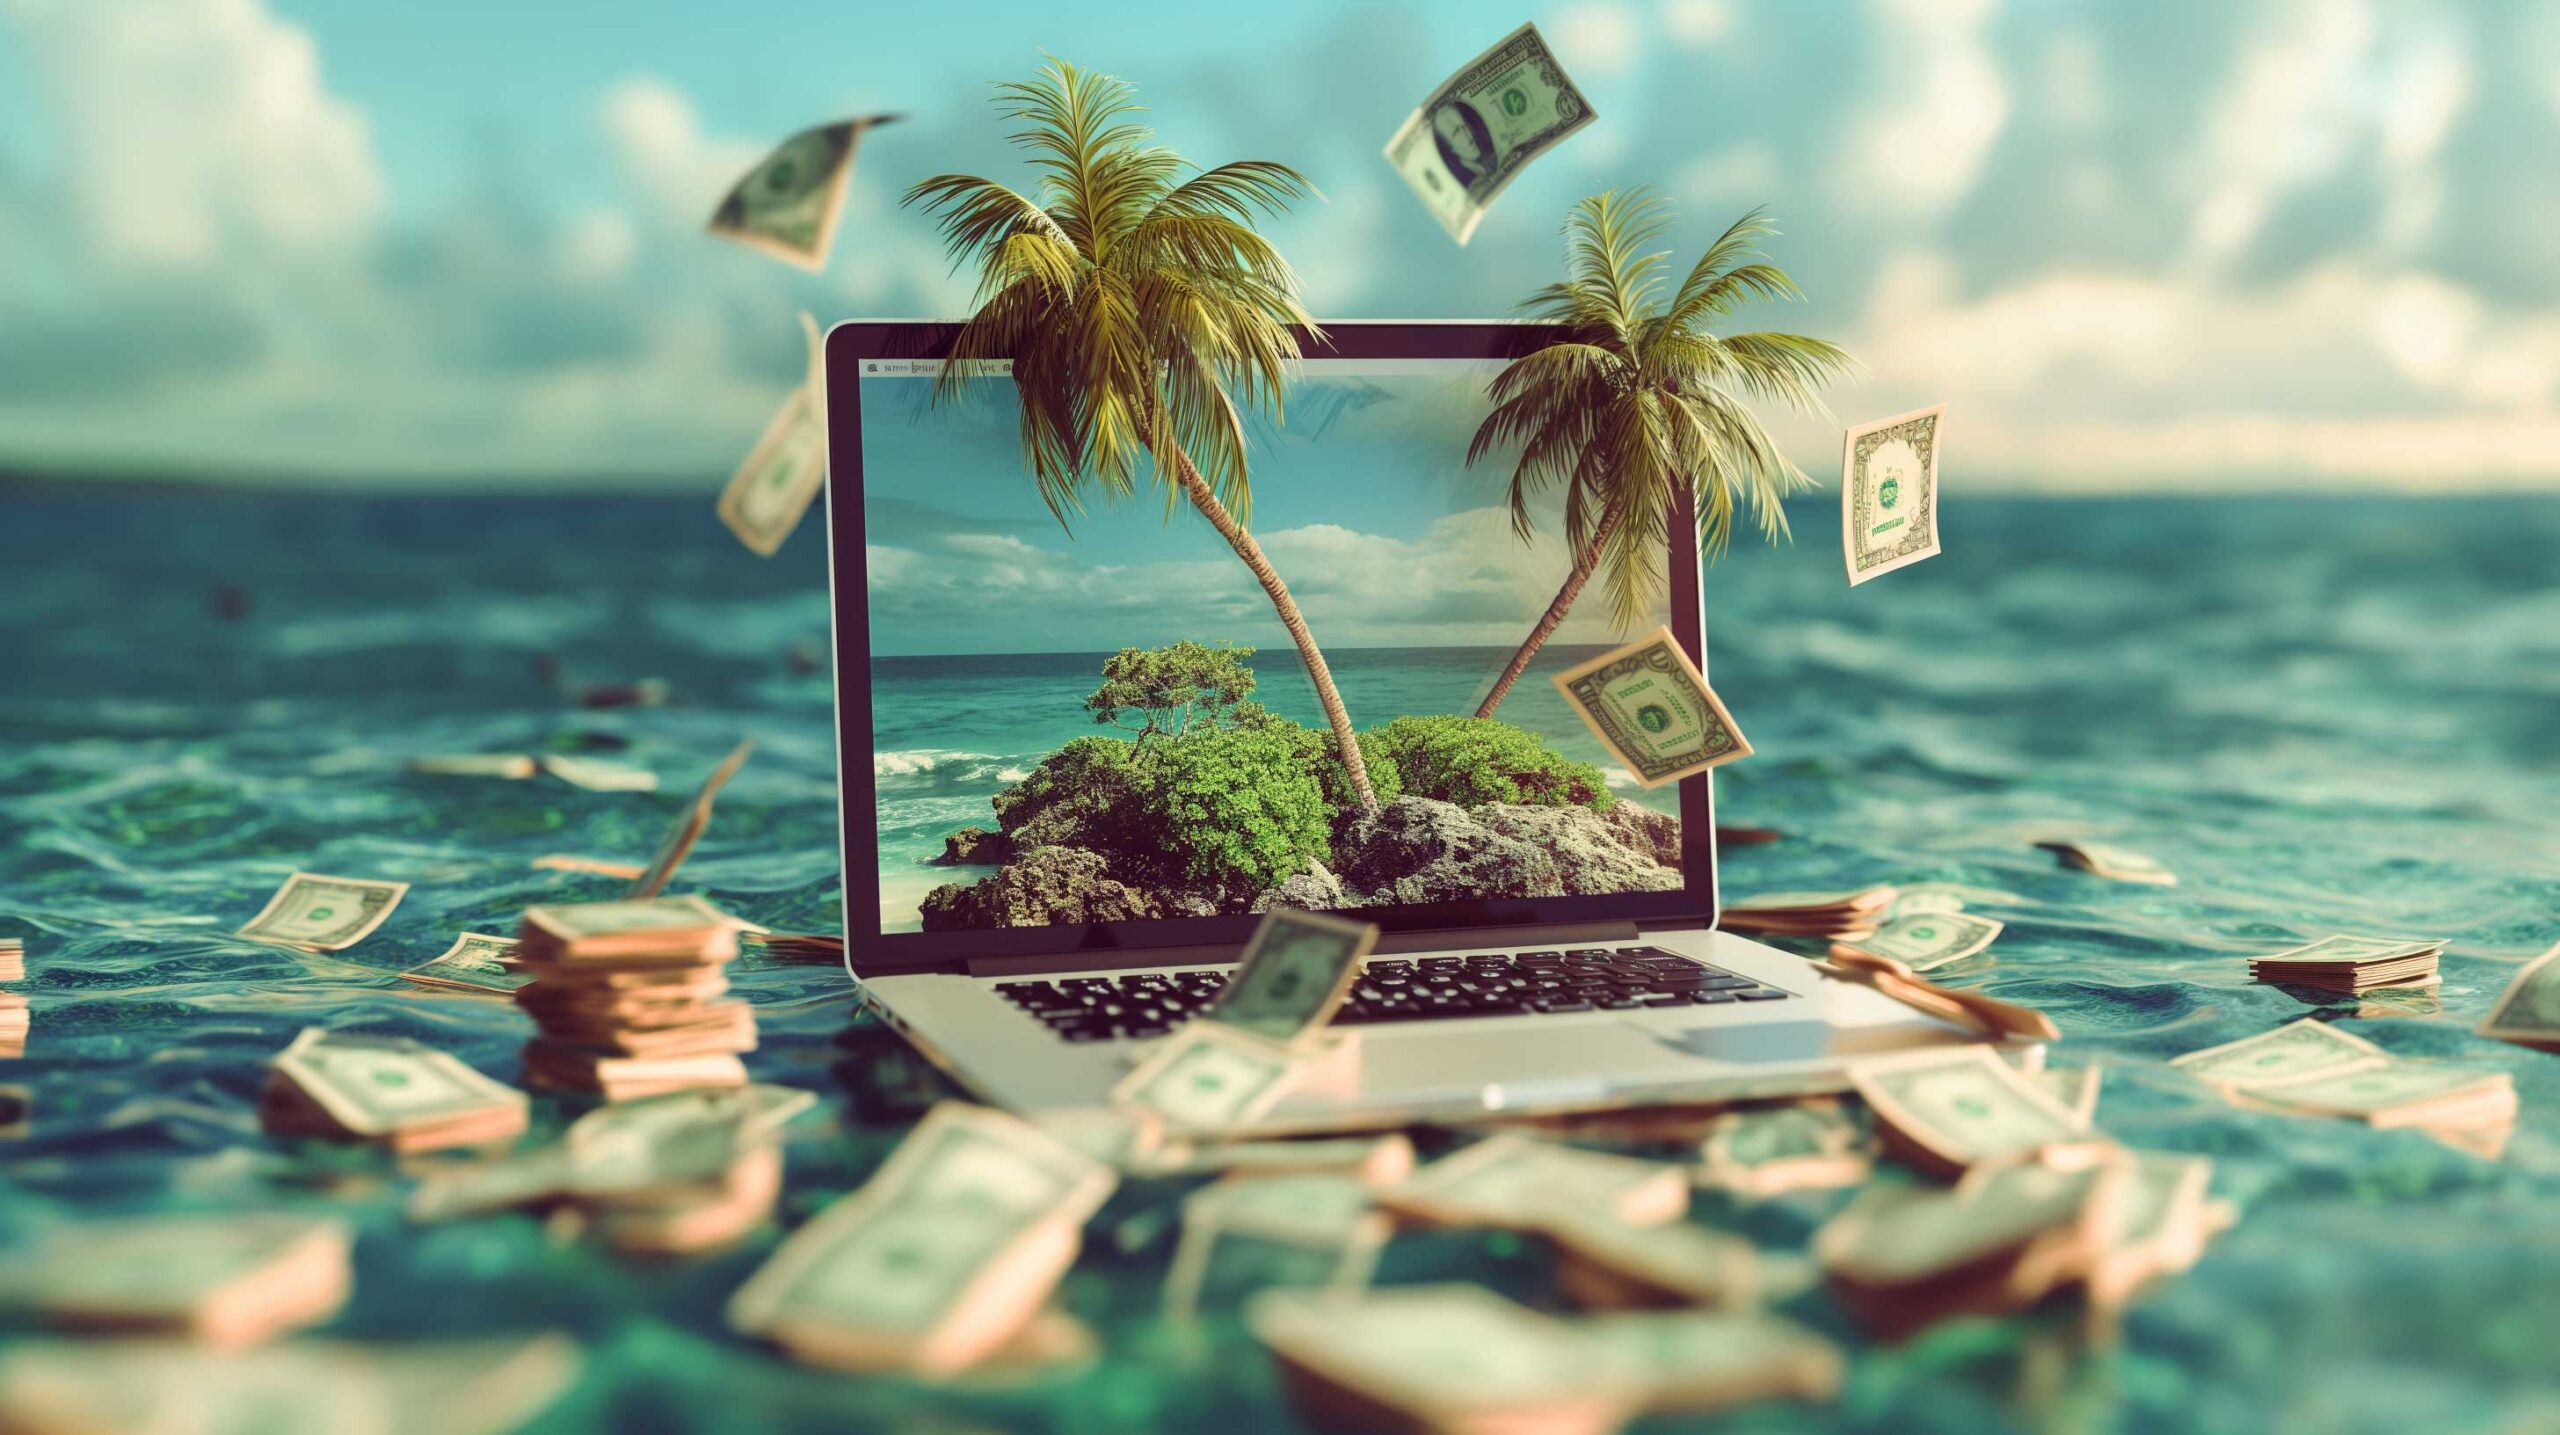 an image of a laptop on an island